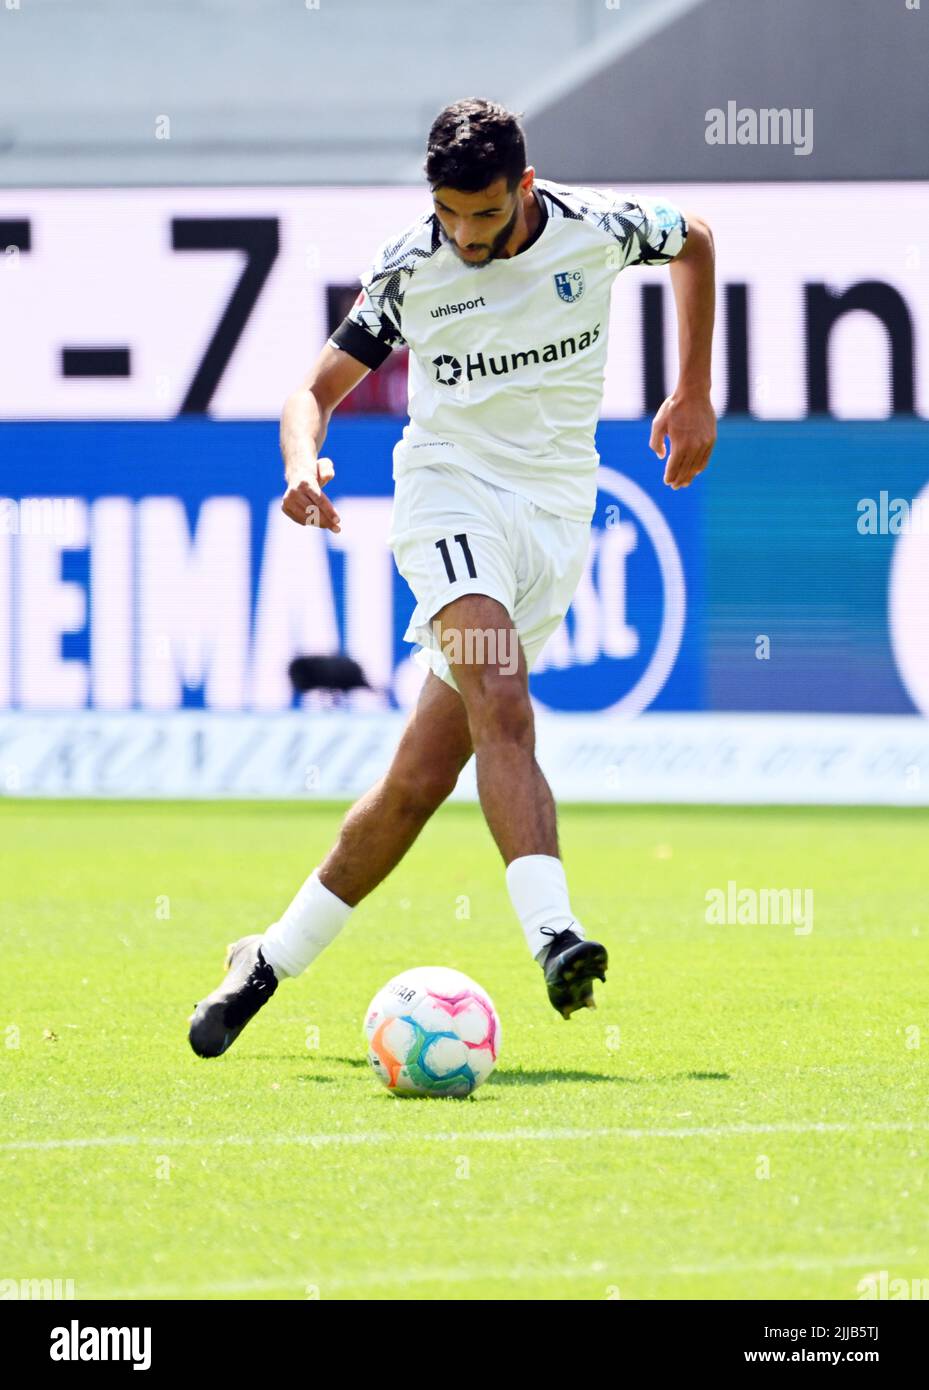 Karlsruhe, Germany. 24th July, 2022. Soccer: 2nd Bundesliga, Karlsruher SC - 1. FC Magdeburg, Matchday 2, at BBBank Wildpark. Magdeburg's Mohammed El Hankouri- Credit: Uli Deck/dpa - IMPORTANT NOTE: In accordance with the requirements of the DFL Deutsche Fußball Liga and the DFB Deutscher Fußball-Bund, it is prohibited to use or have used photographs taken in the stadium and/or of the match in the form of sequence pictures and/or video-like photo series./dpa/Alamy Live News Stock Photo